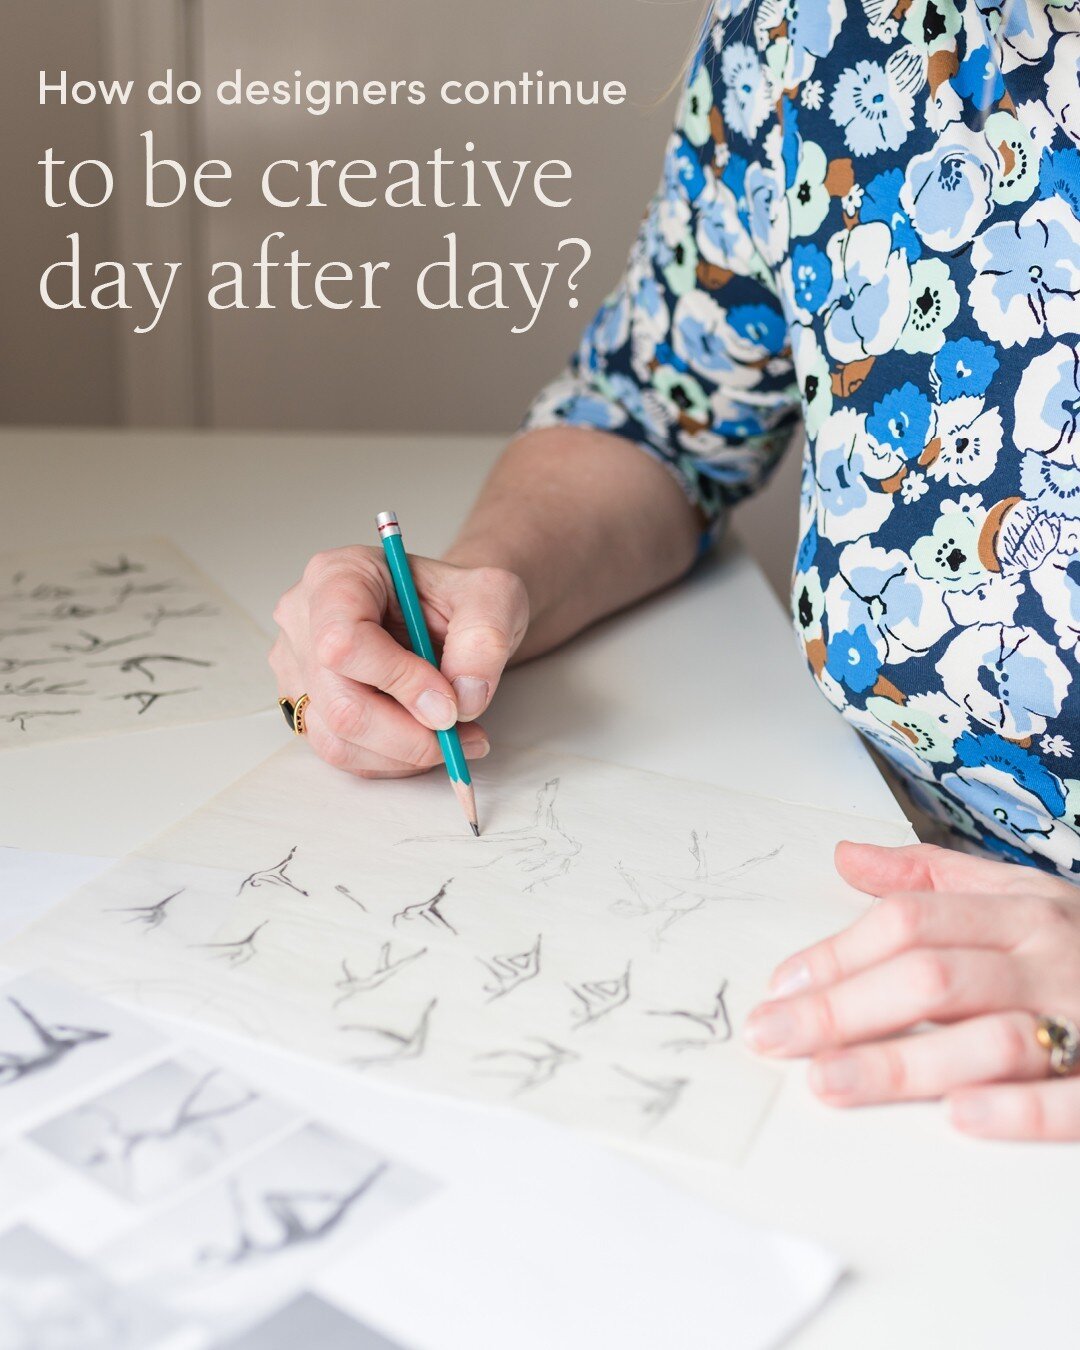 How do designers continue to be creative day after day?⁠
⁠
⁠
💪Creativity is like a muscle that needs daily exercise and supplements to keep it working at its best.⁠
⁠
For me&mdash;I make sure to refill my cup with activities that do NOT require a co